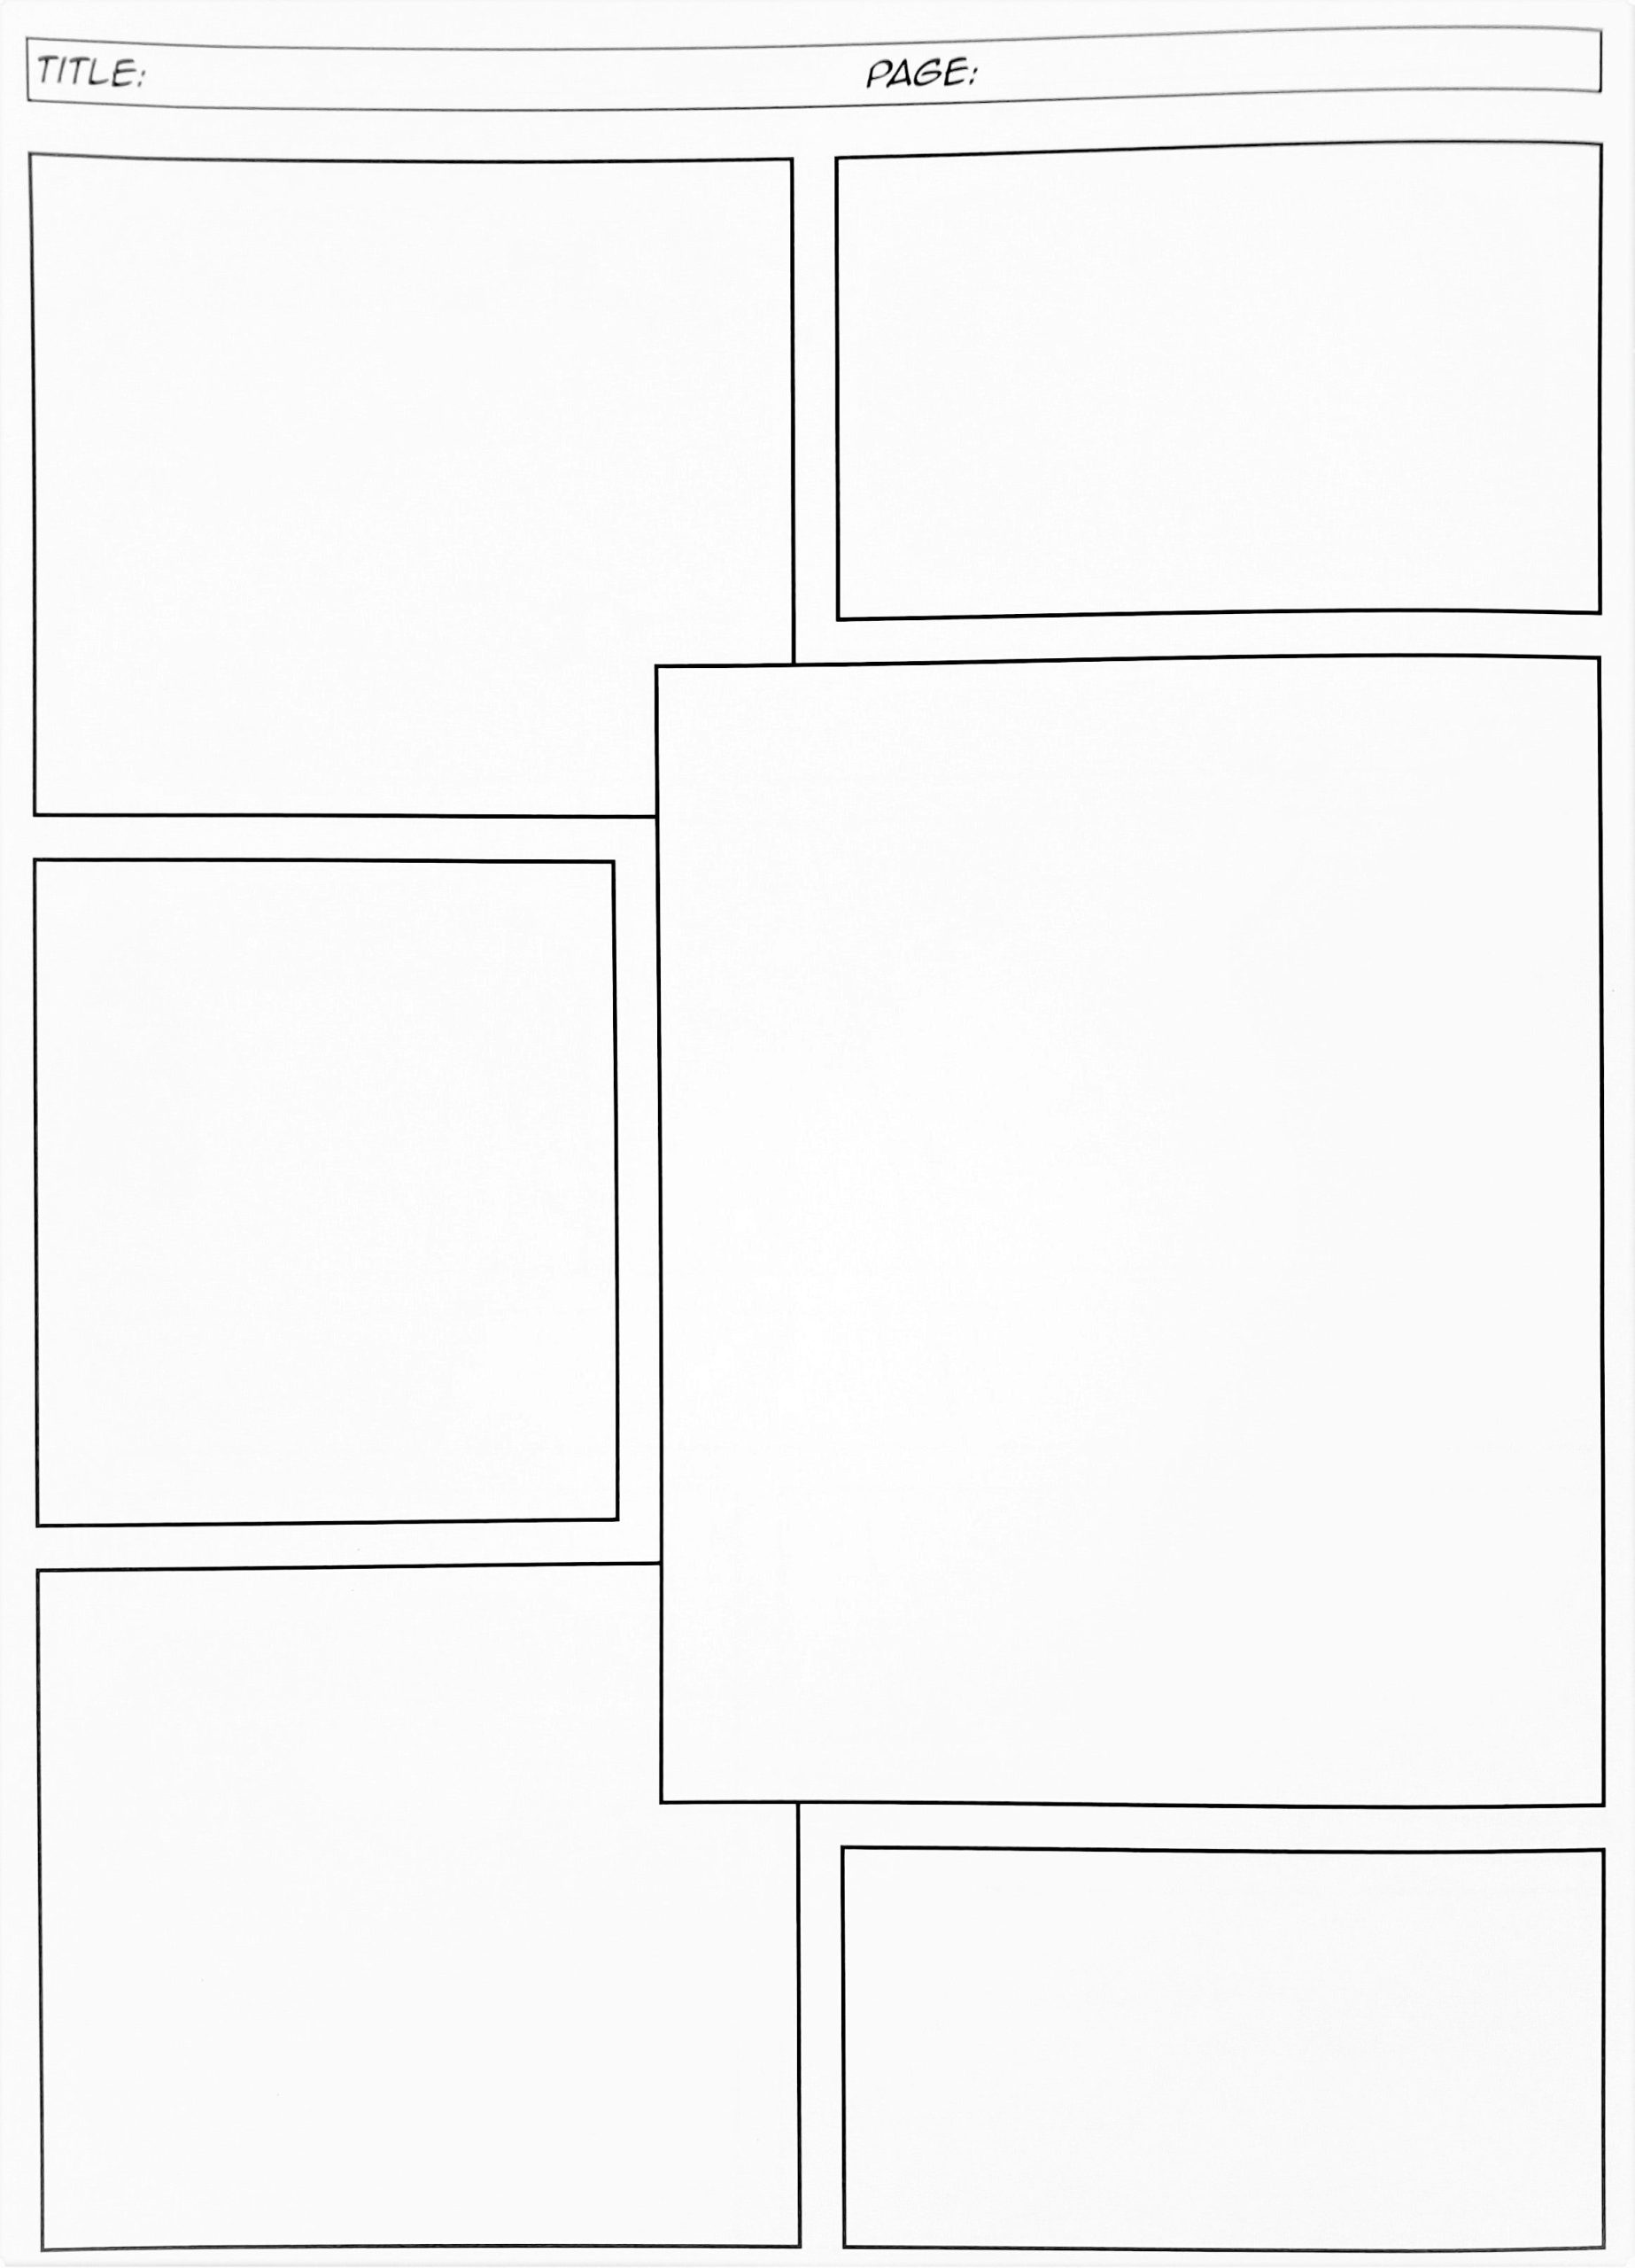 Blank Comic Book Panels / Template Comic Strip | Comic Book Template Within Printable Blank Comic Strip Template For Kids